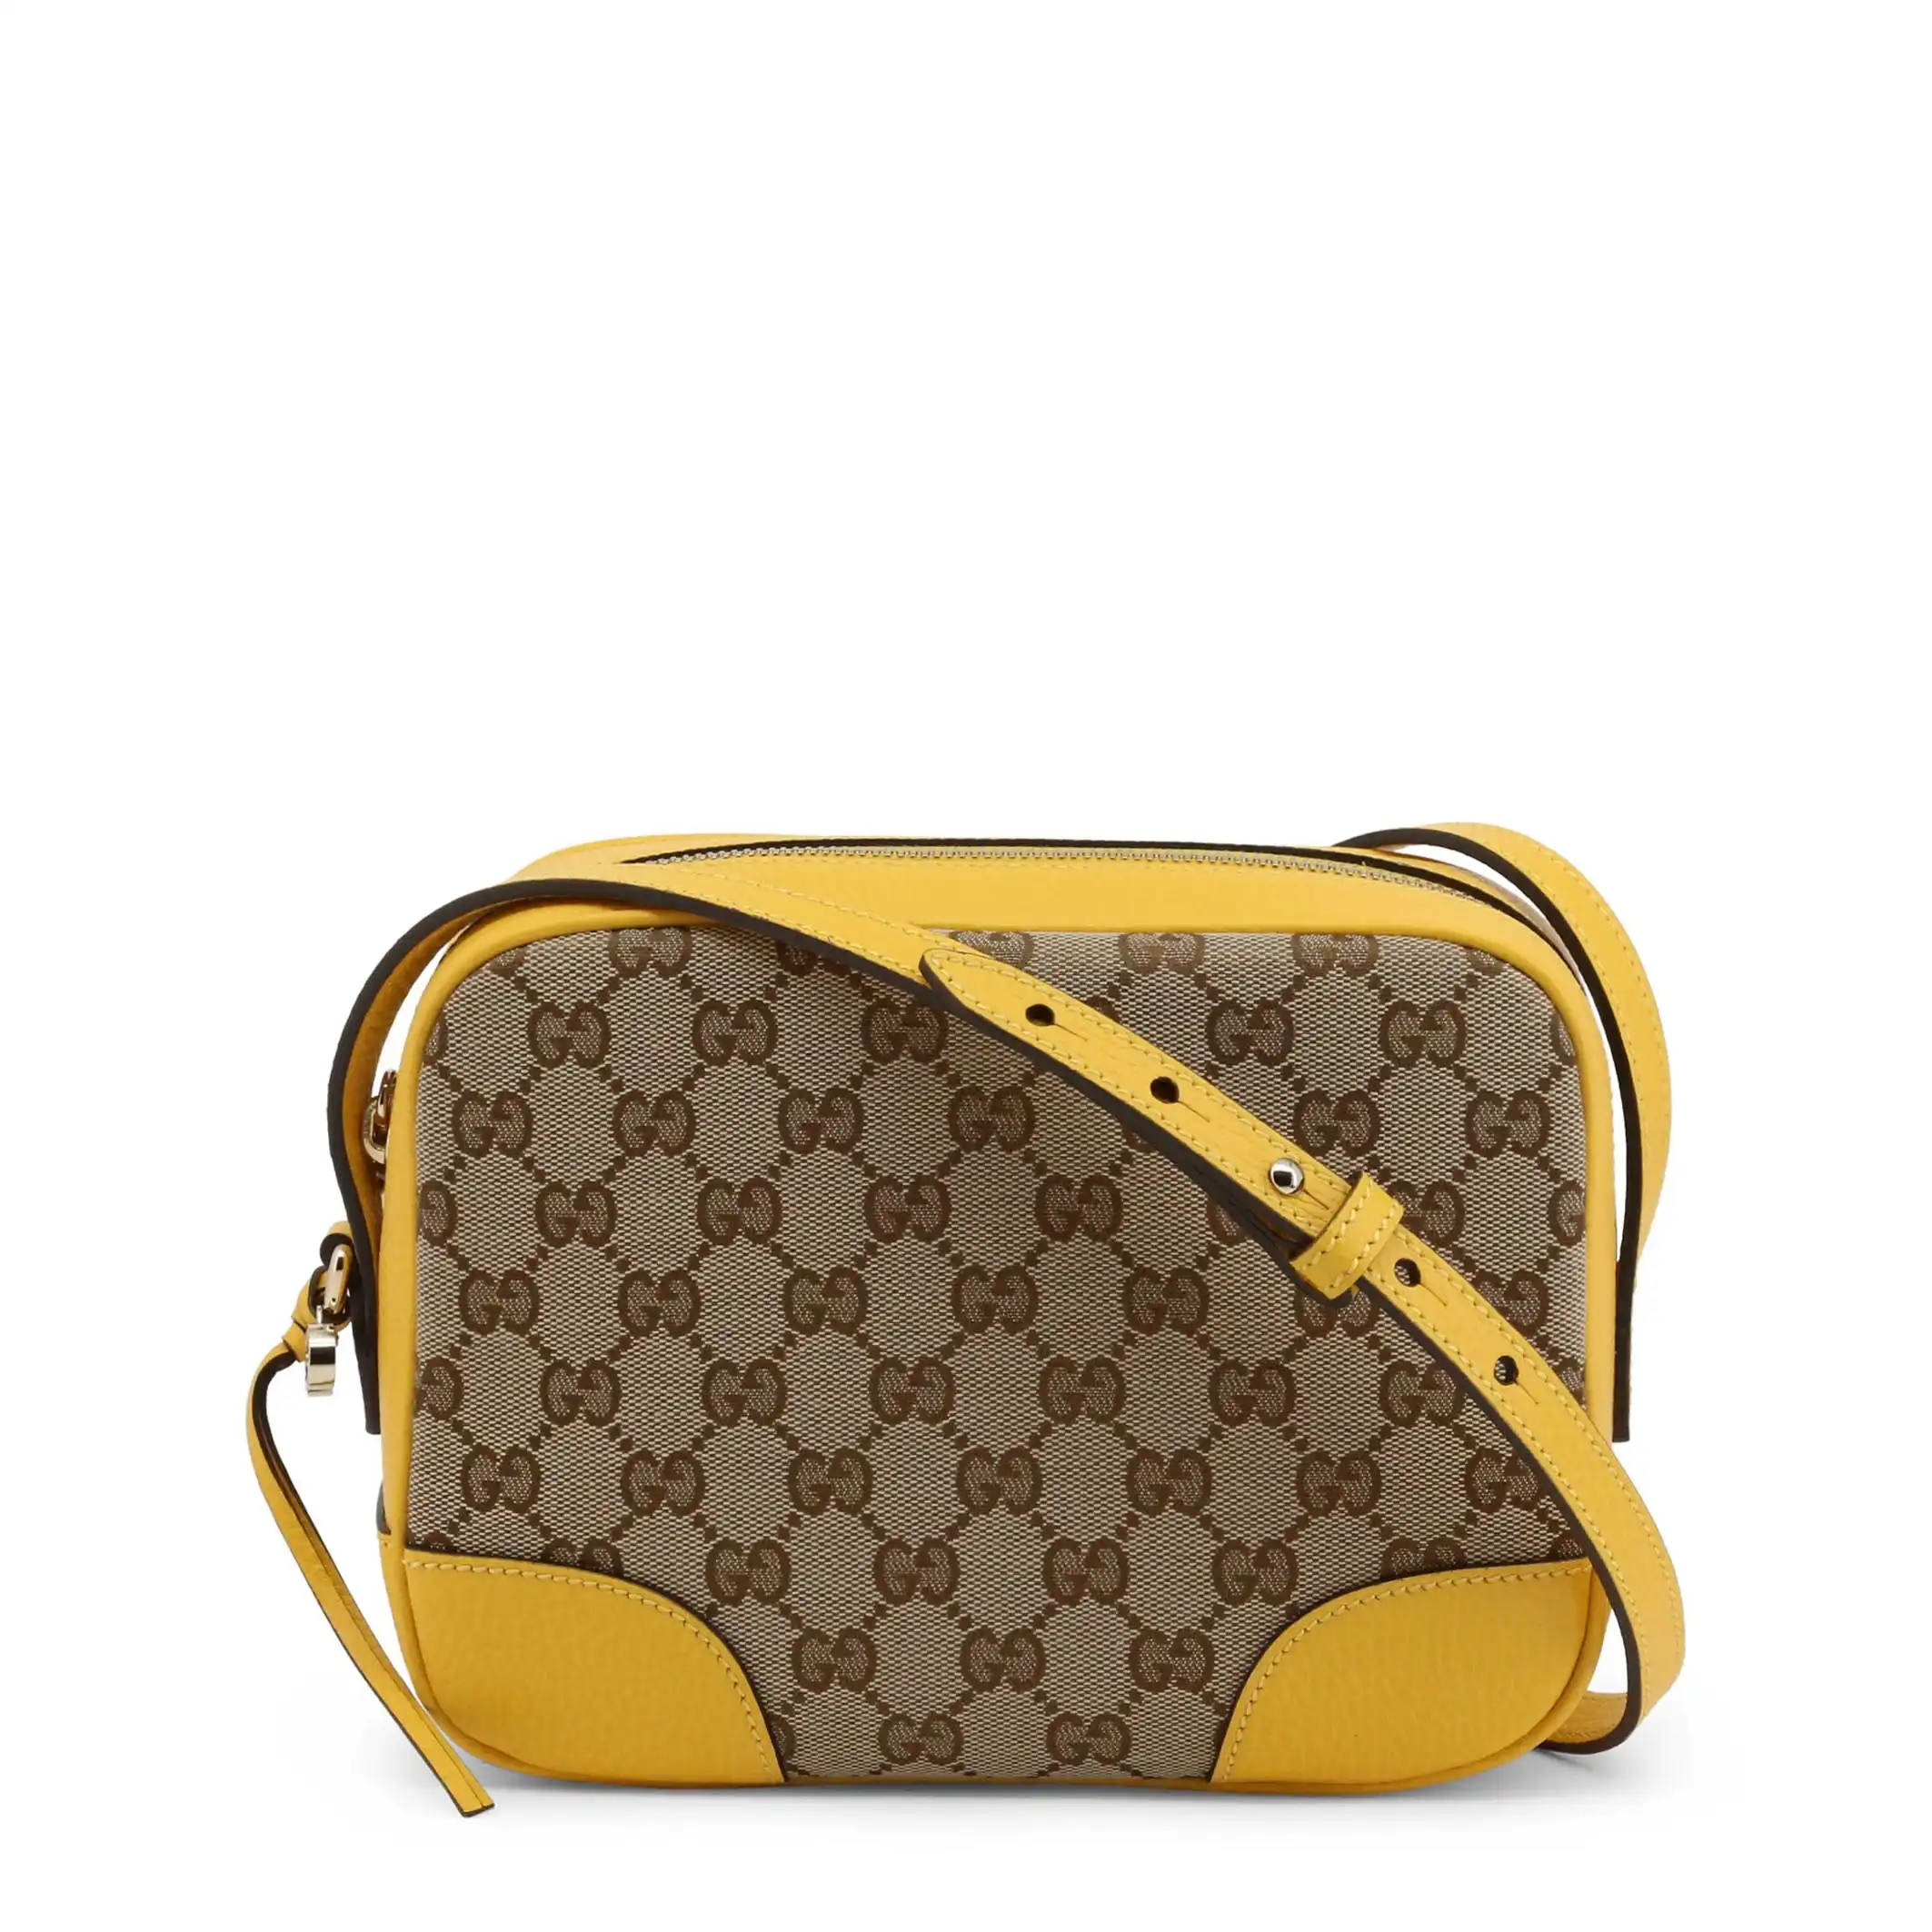 Gucci Bag and Accessory Sale - up to 20% off